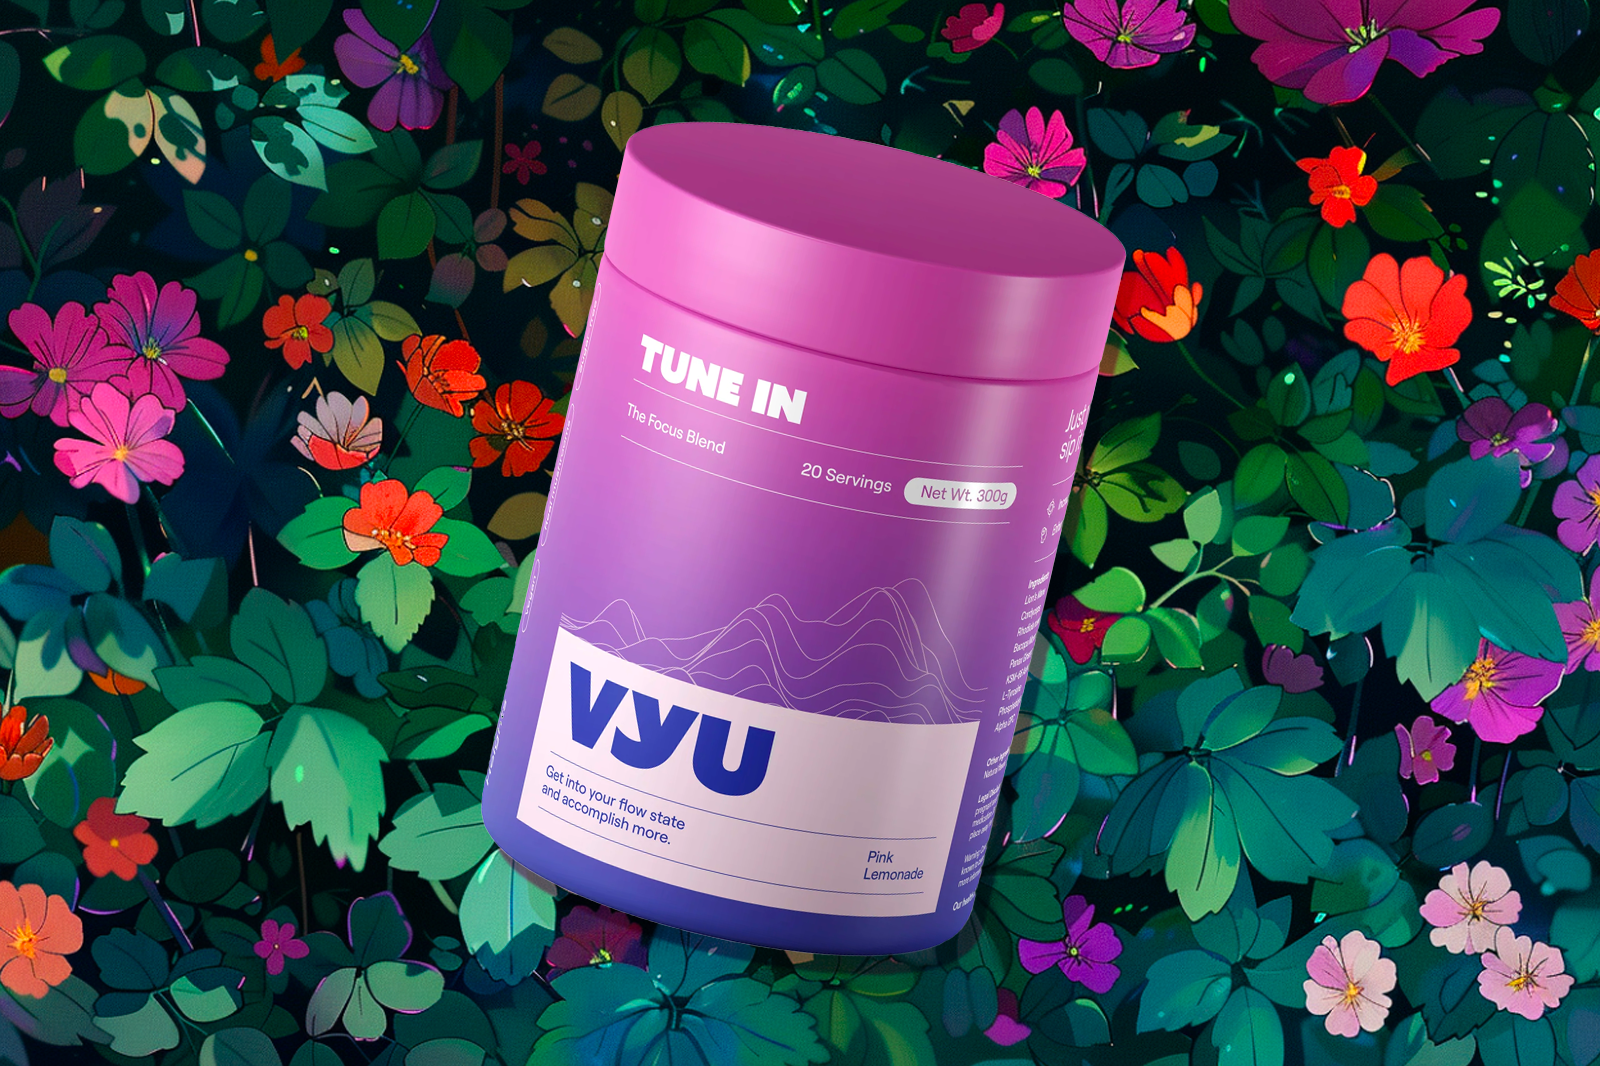 A VYU TUNE IN container in Pink Lemonade flavor against a backdrop of flowers and leaves